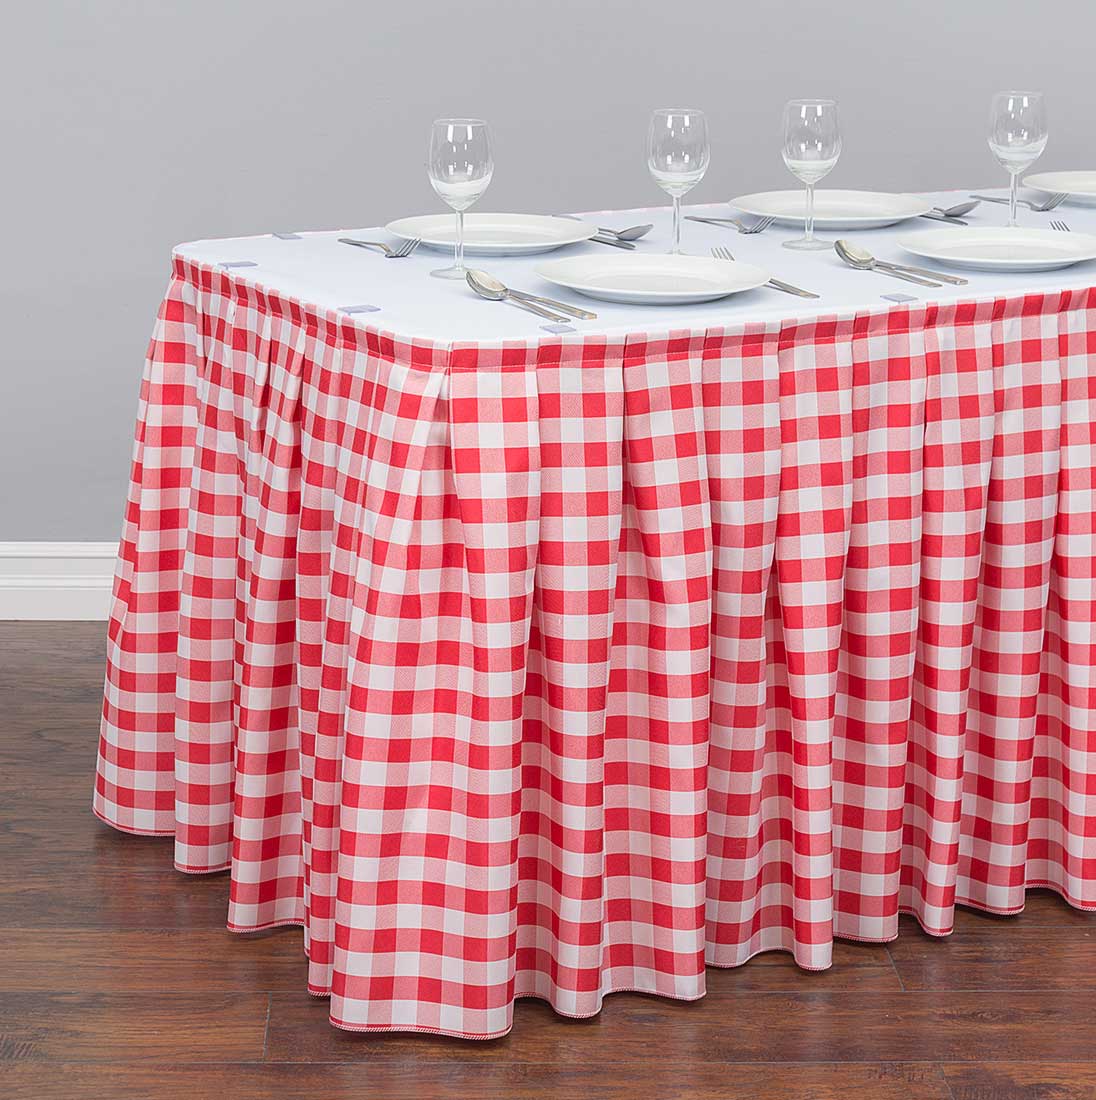 Adorable Table Design and Decor Ideas With Red Checkered Vinyl Tablecloths | Table Covers Depot